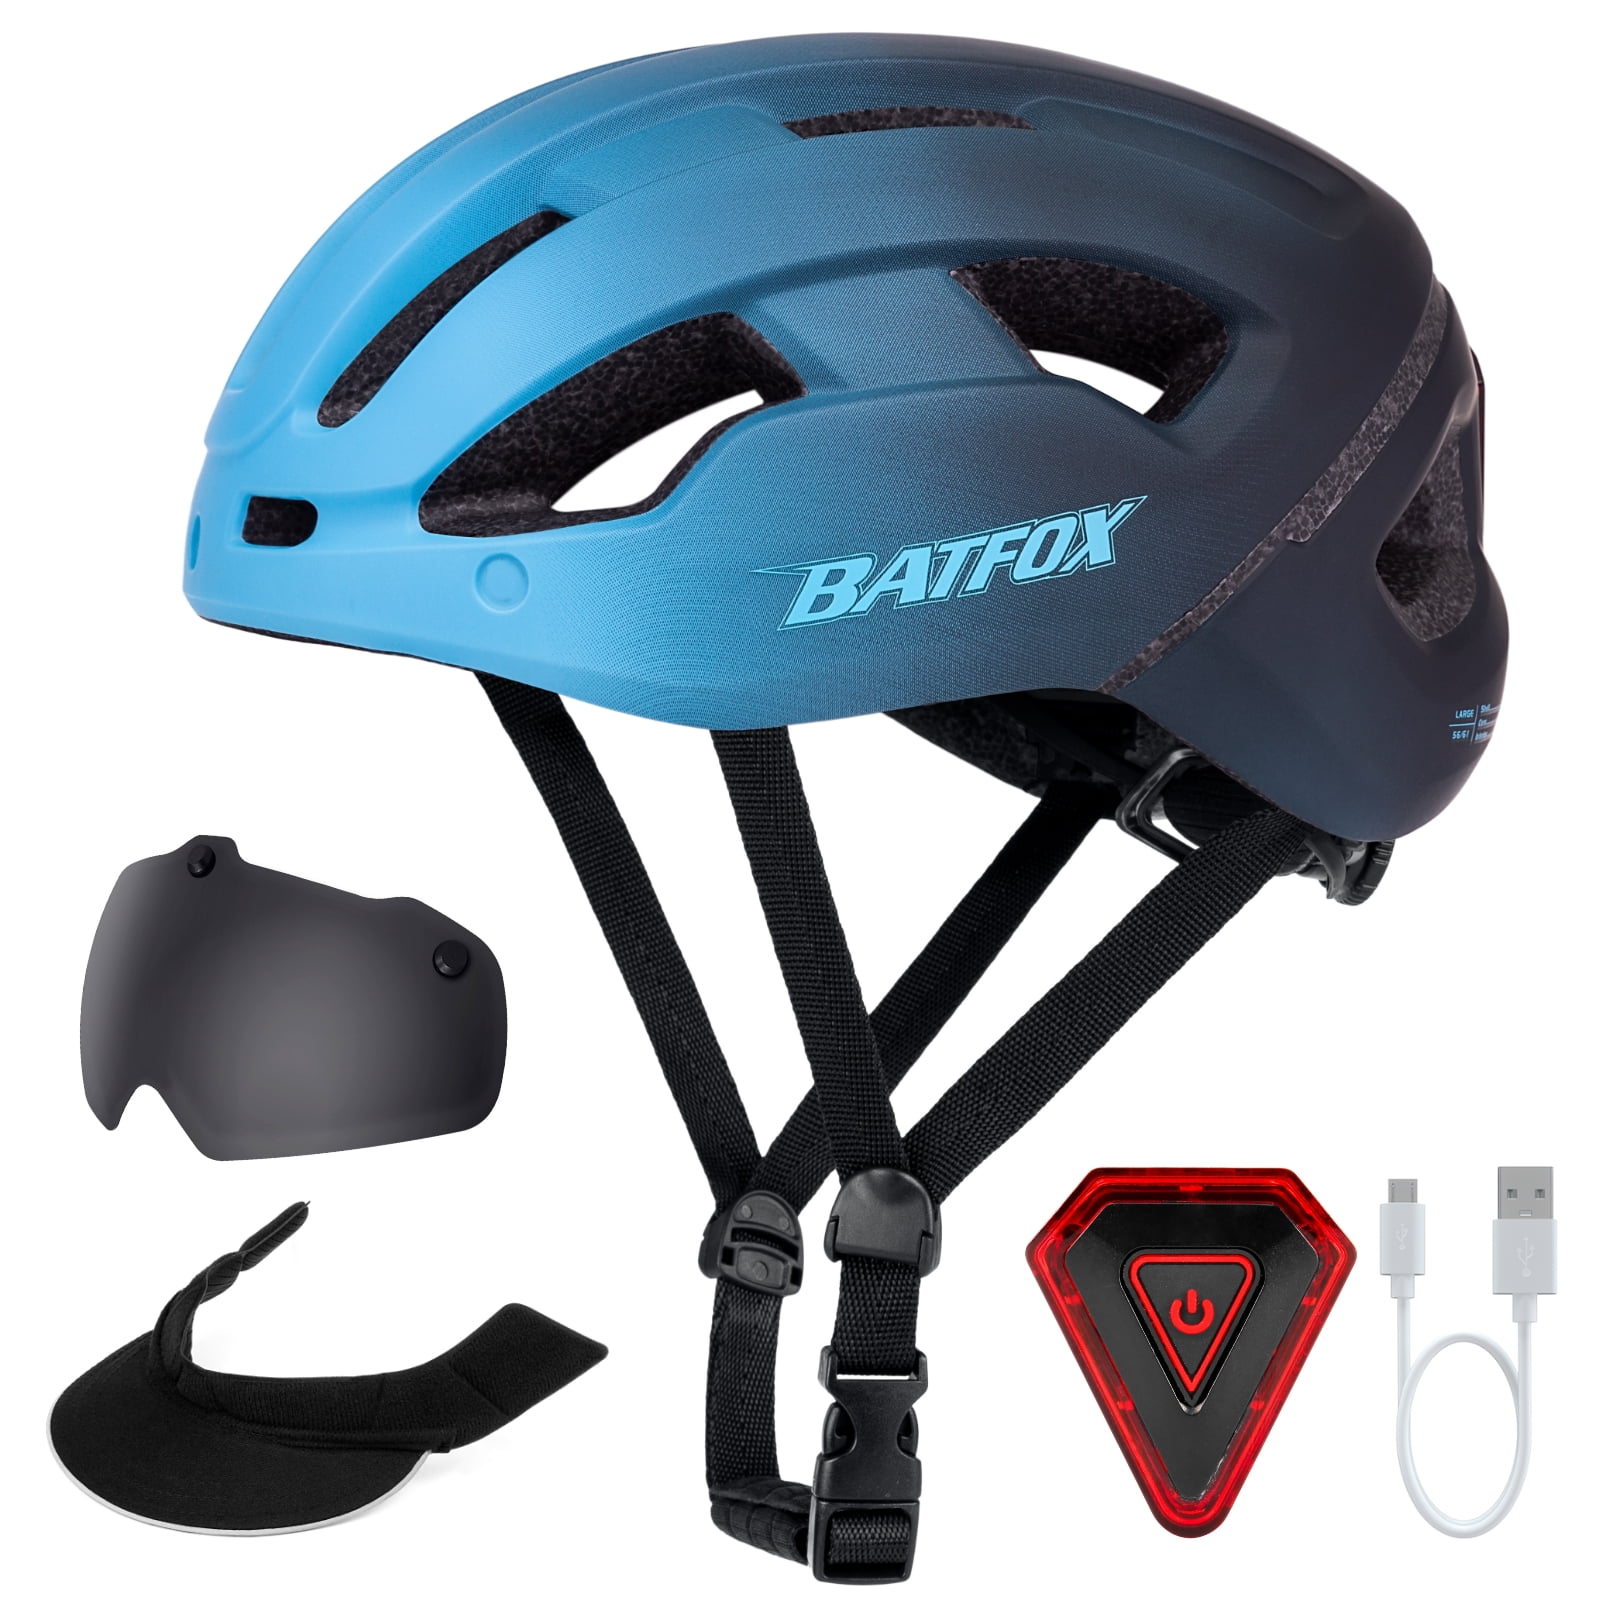 Adult Safety Bicycle Bike Helmet with Removable Shield Visor Lightweight 